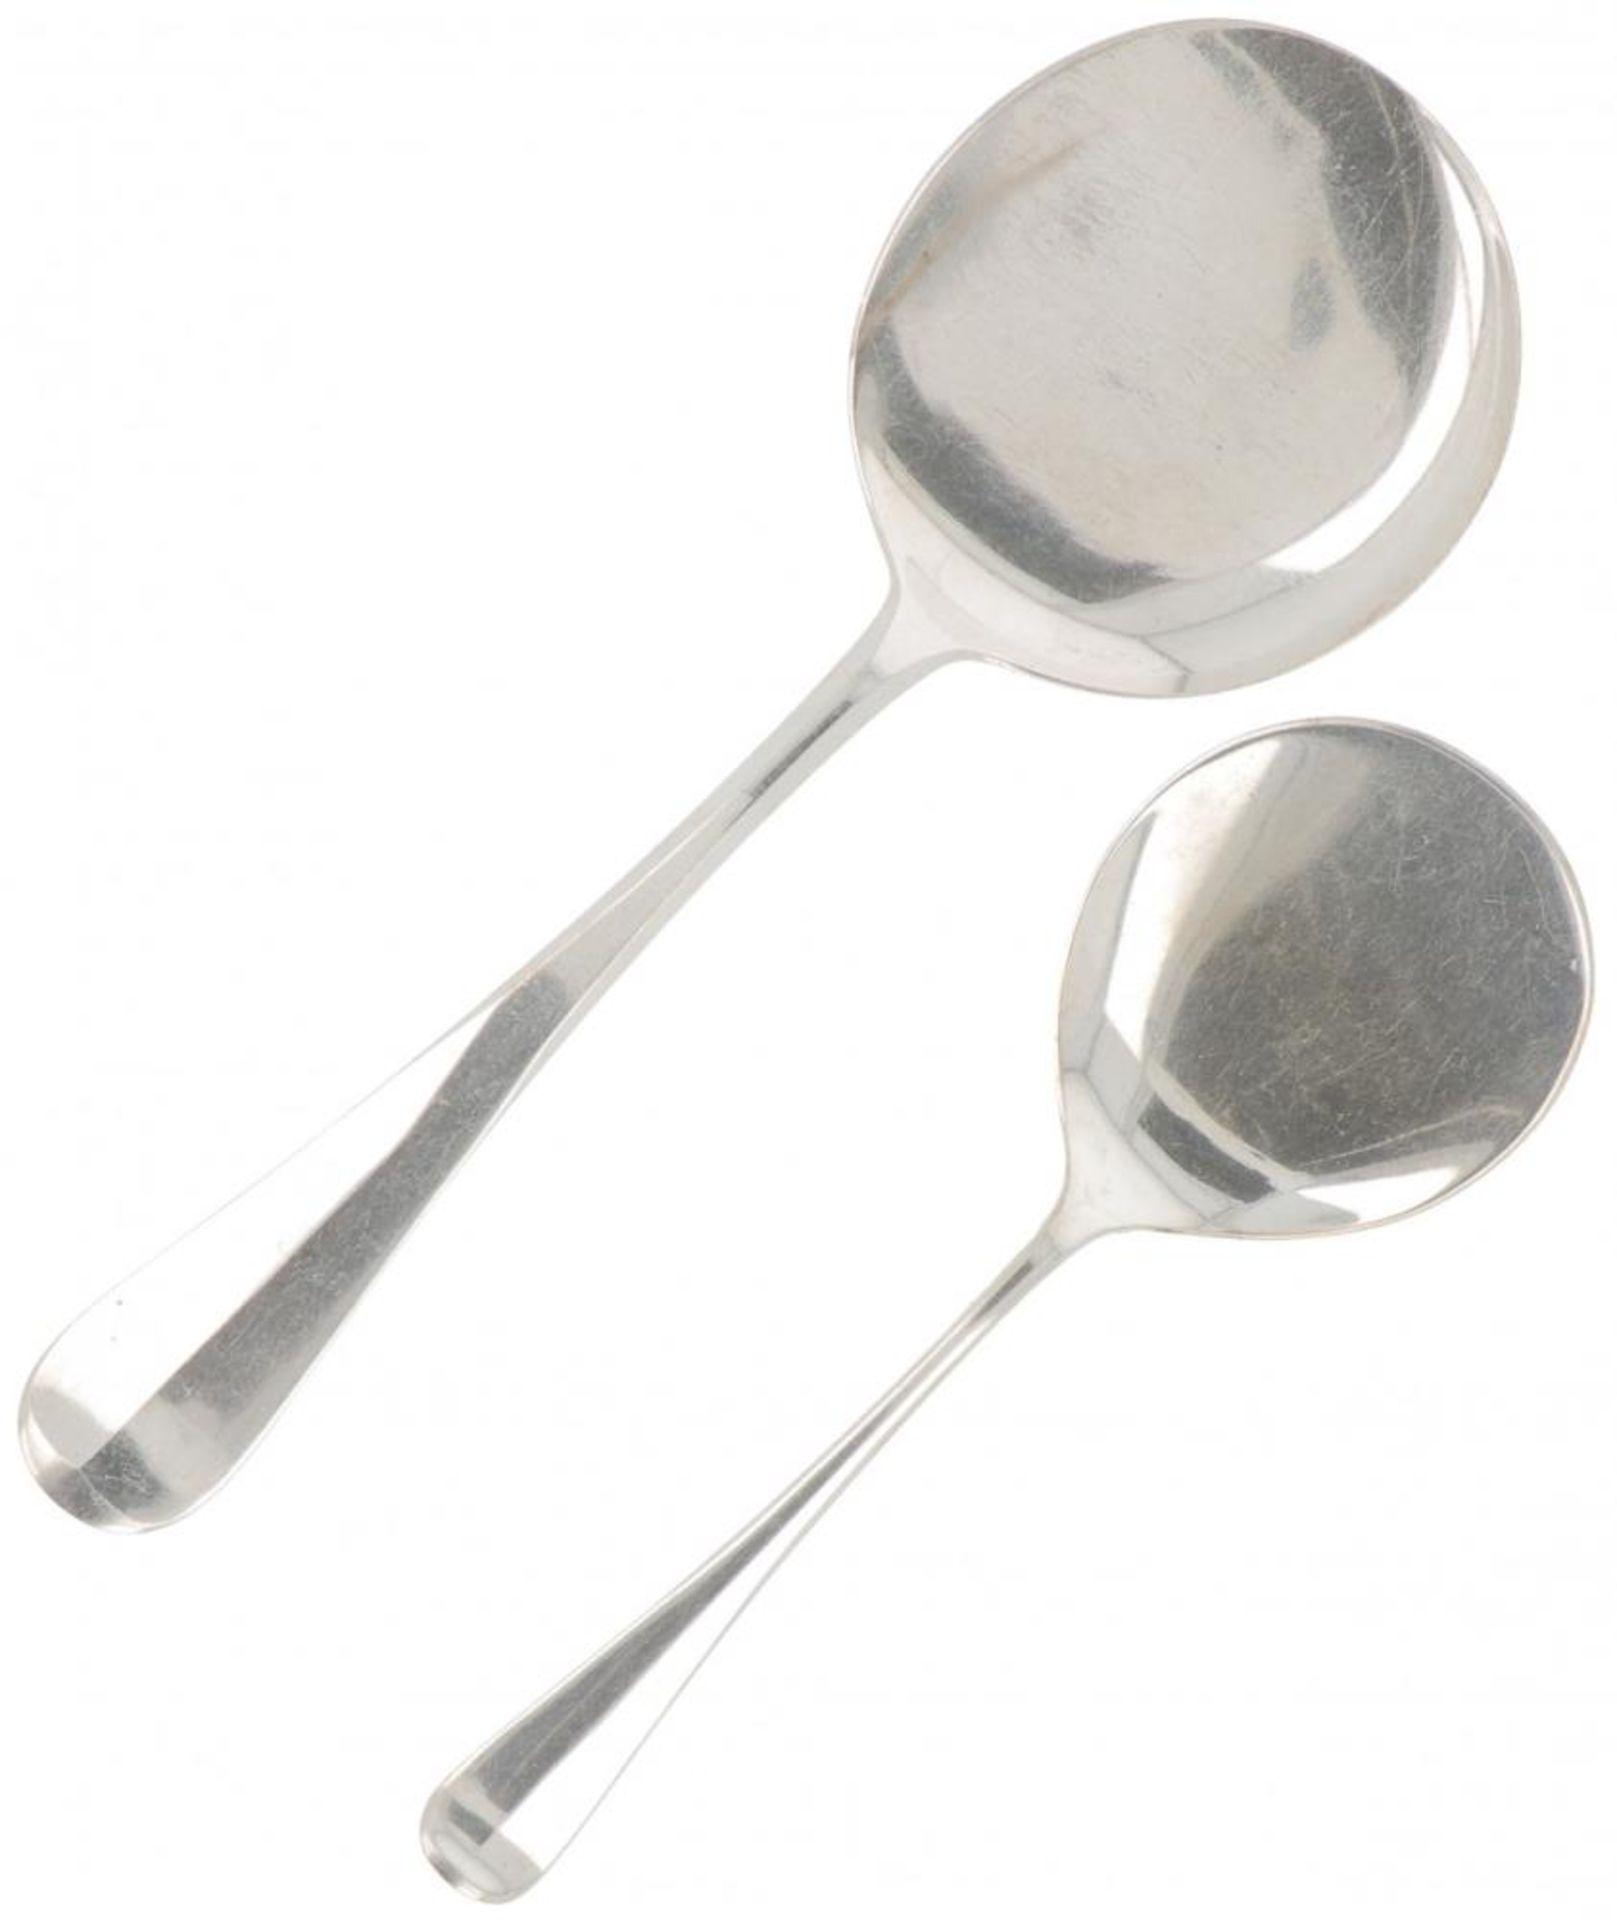 Pastry scoop & petit-four scoop "Haags Lofje" silver.